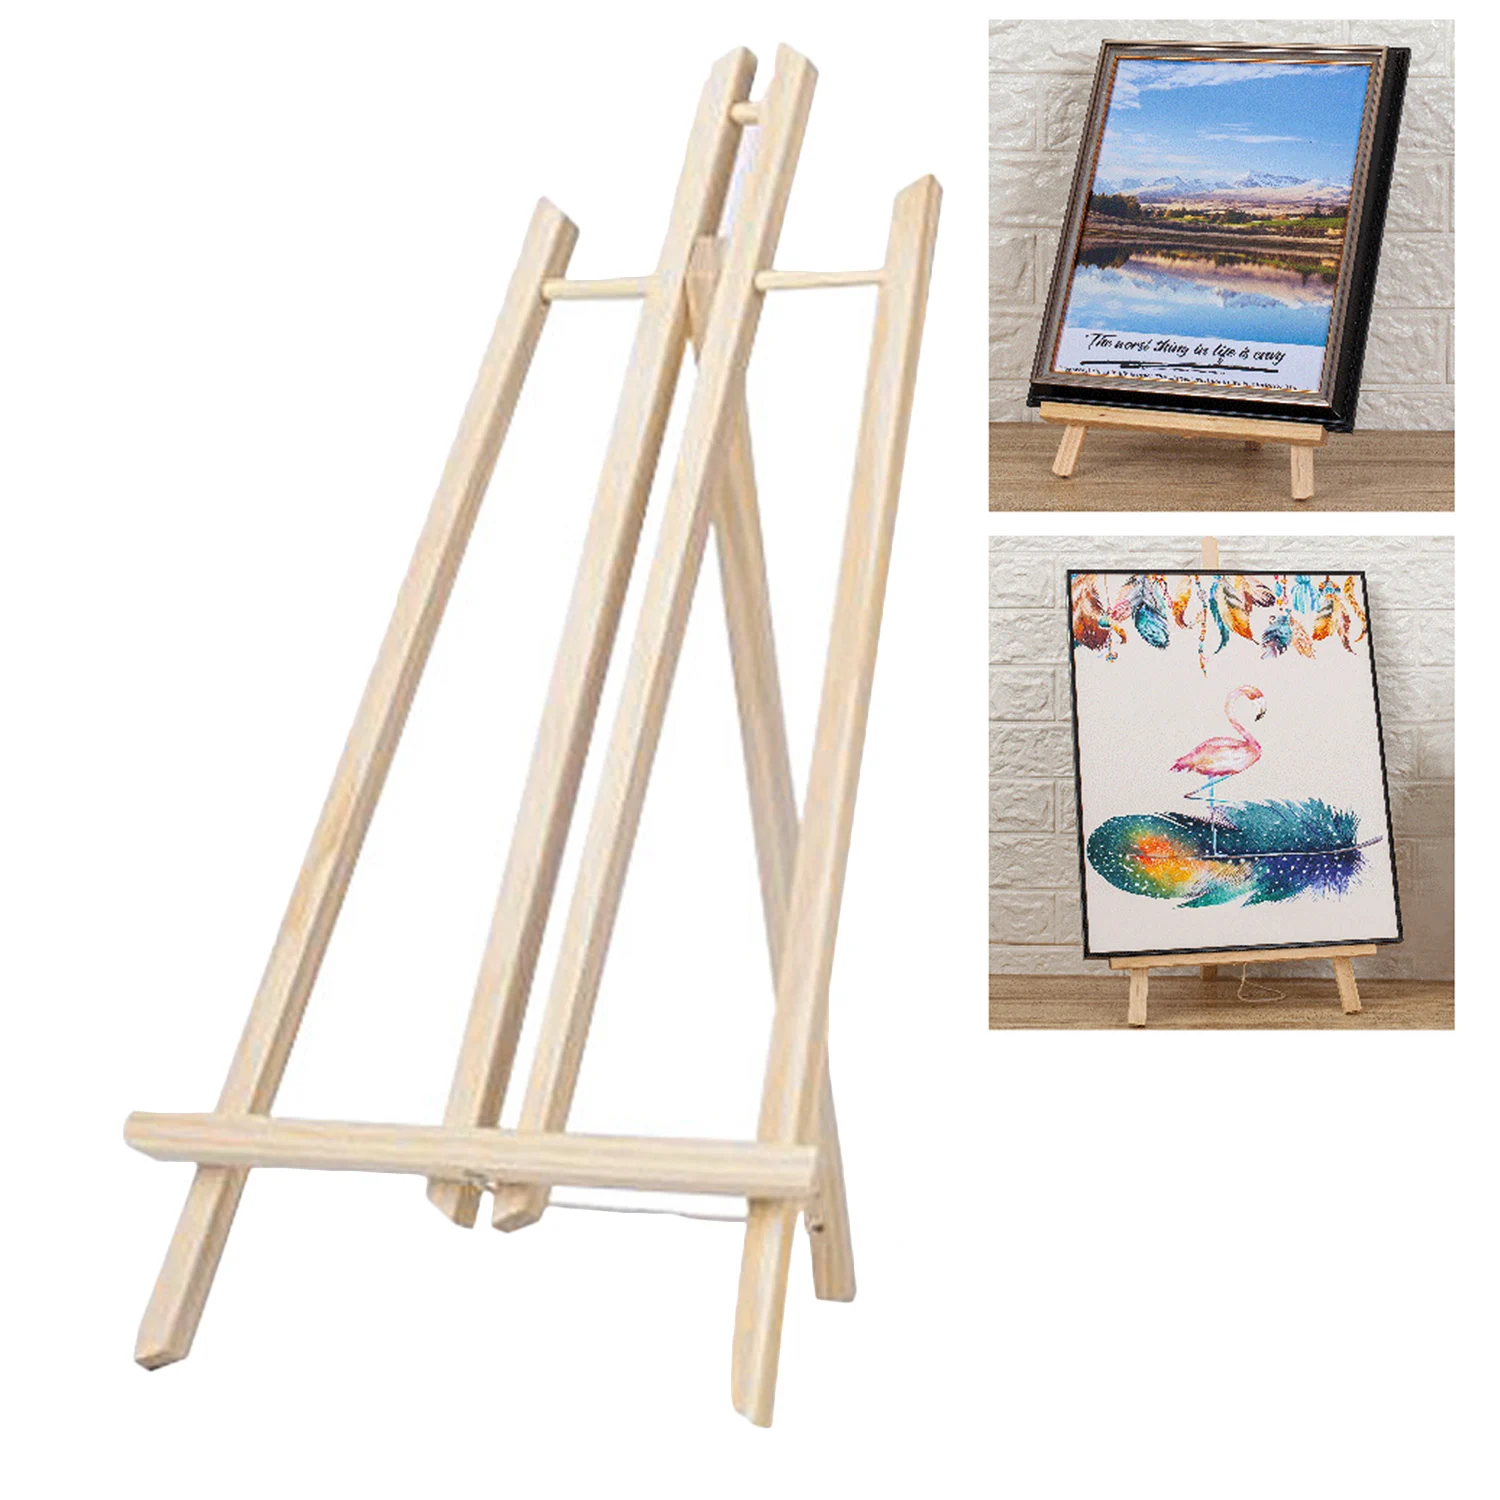 30/40/50cm Portable Wooden Easel Display Shelf Holder Stand for Artist Painting Sketching DIY Arts Photo Cards Displaying